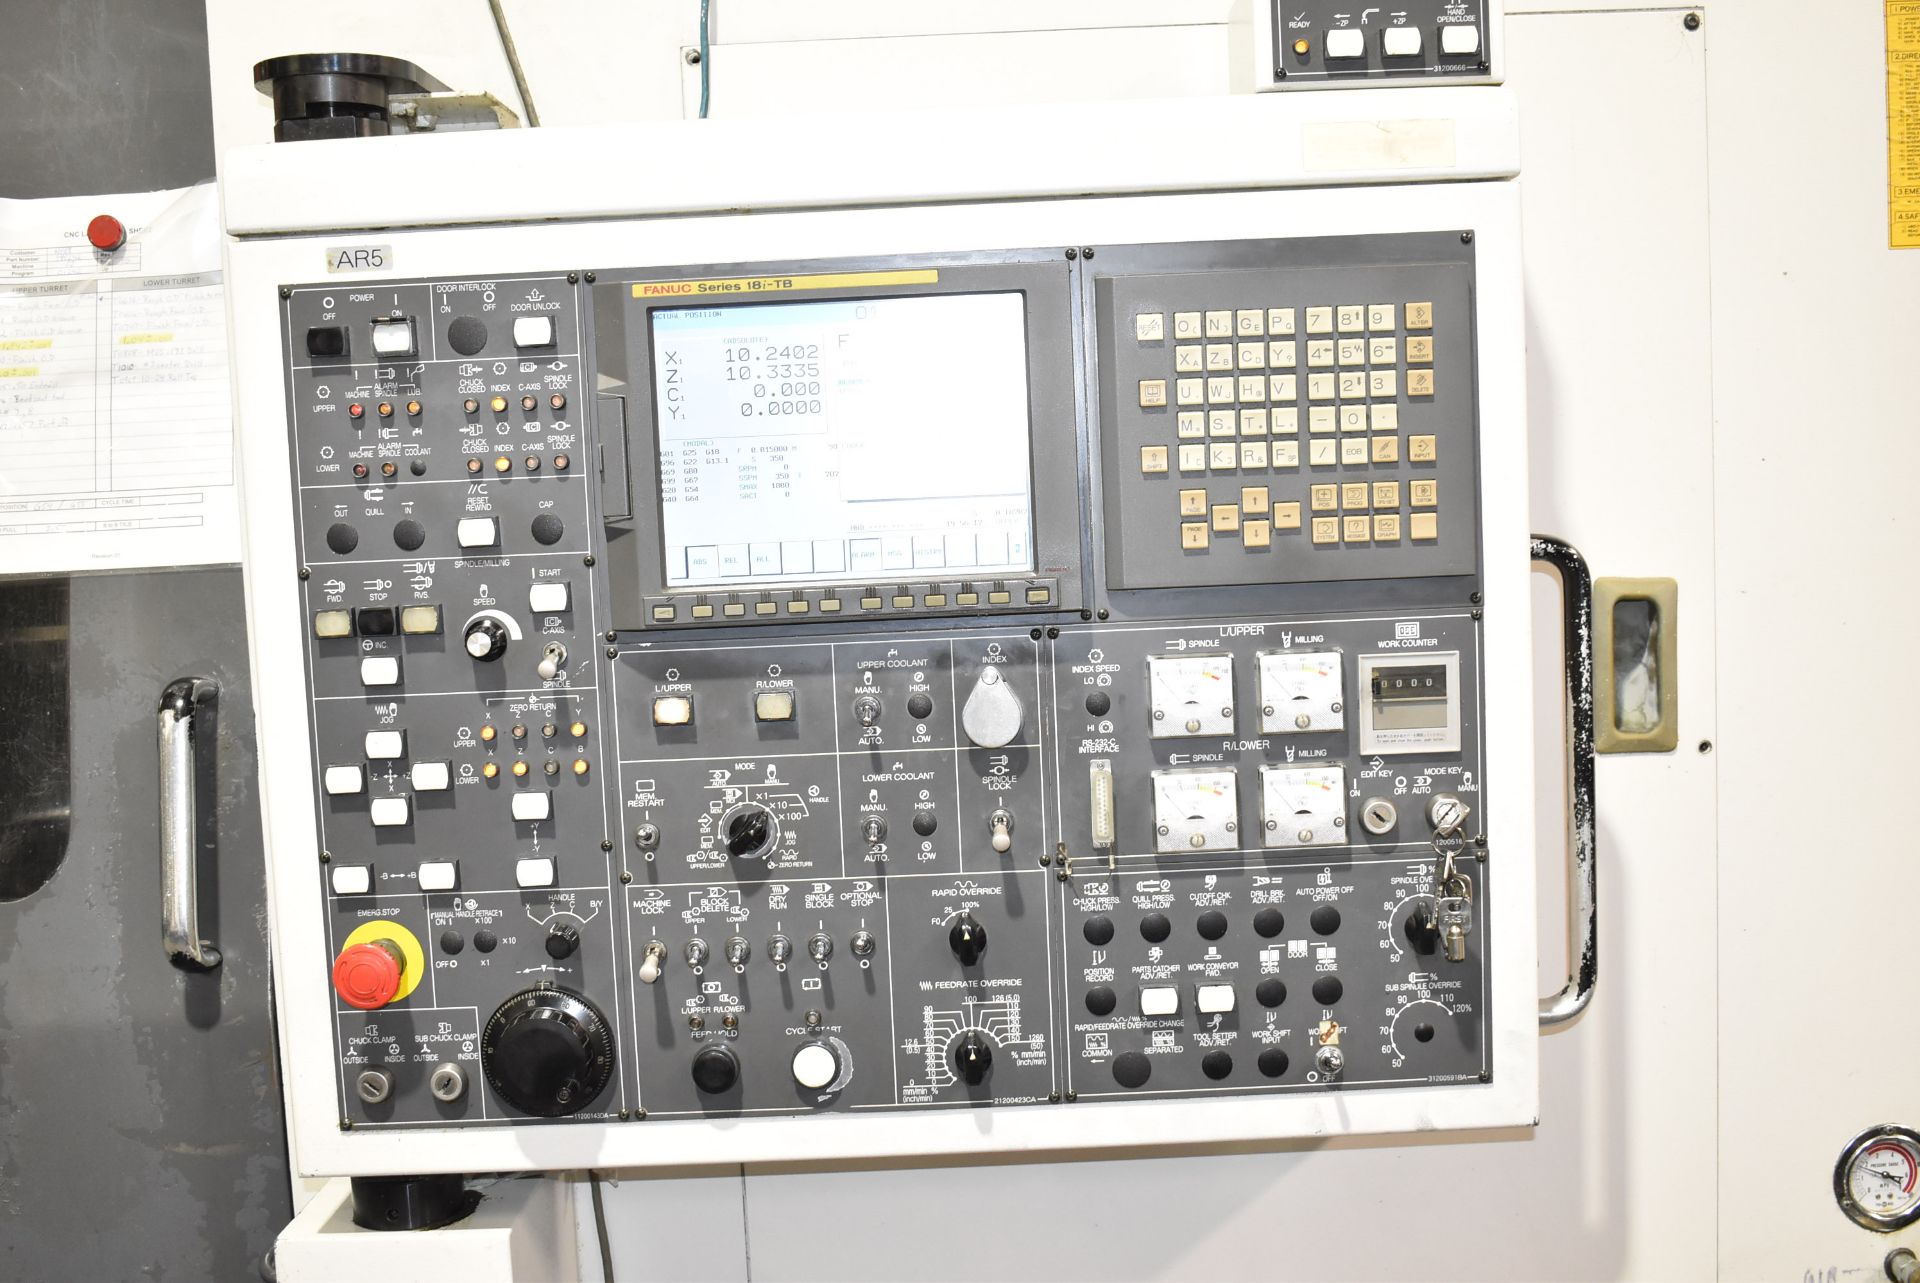 NAKAMURA-TOME (2006) WT-250 MMYS MULTI-AXIS OPPOSED SPINDLE AND TWIN TURRET CNC MULTI-TASKING CENTER - Image 8 of 9